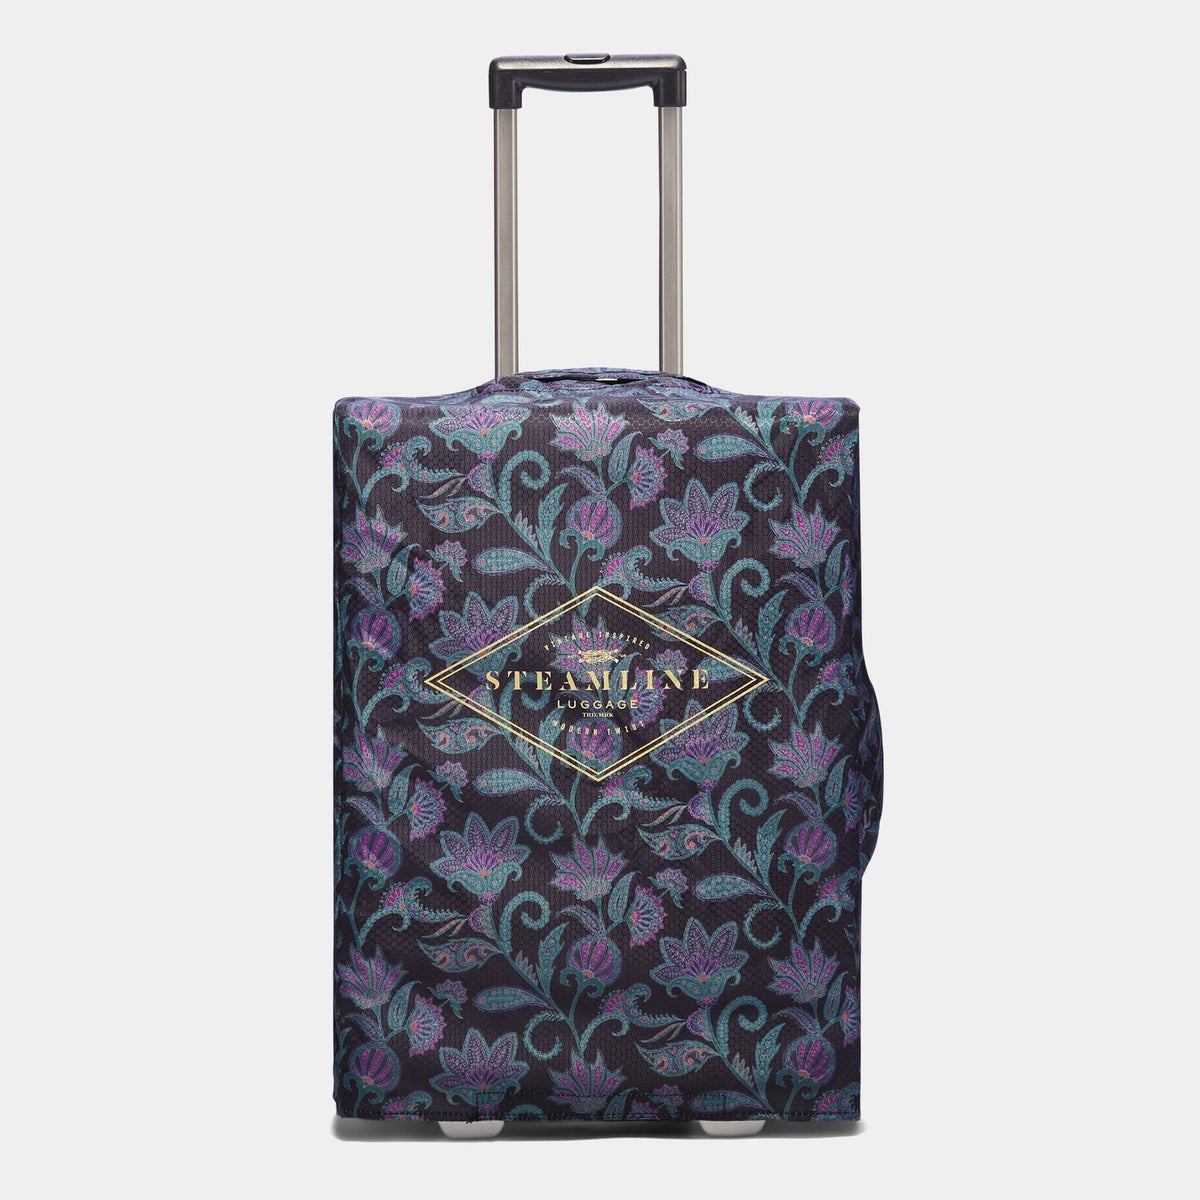 The Jacquard Protective Cover - Stowaway Size Protective Cover Steamline Luggage 